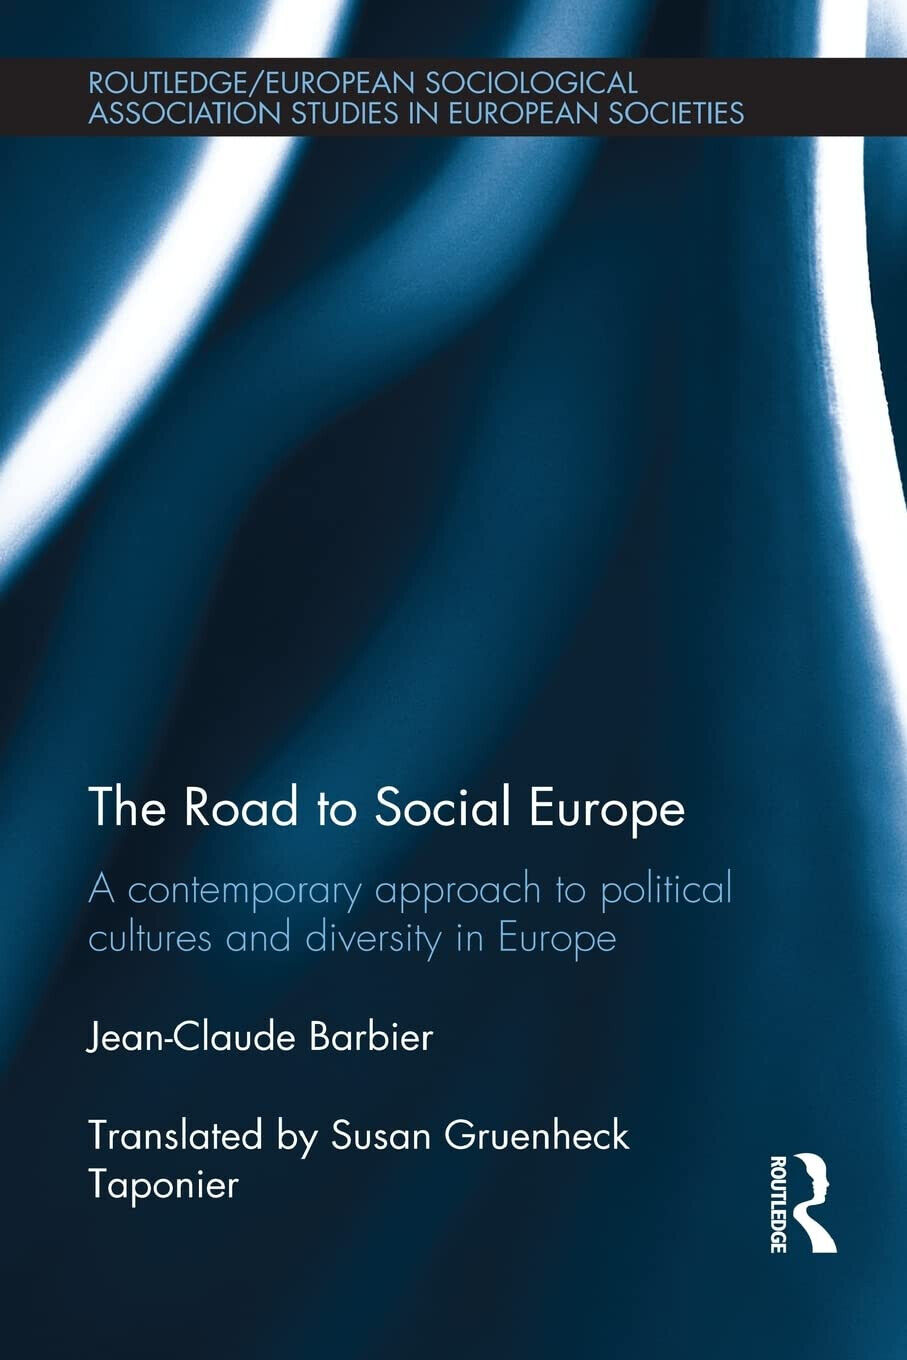 The Road to Social Europe - Jean-Claude - Taylor & Francis, 2014